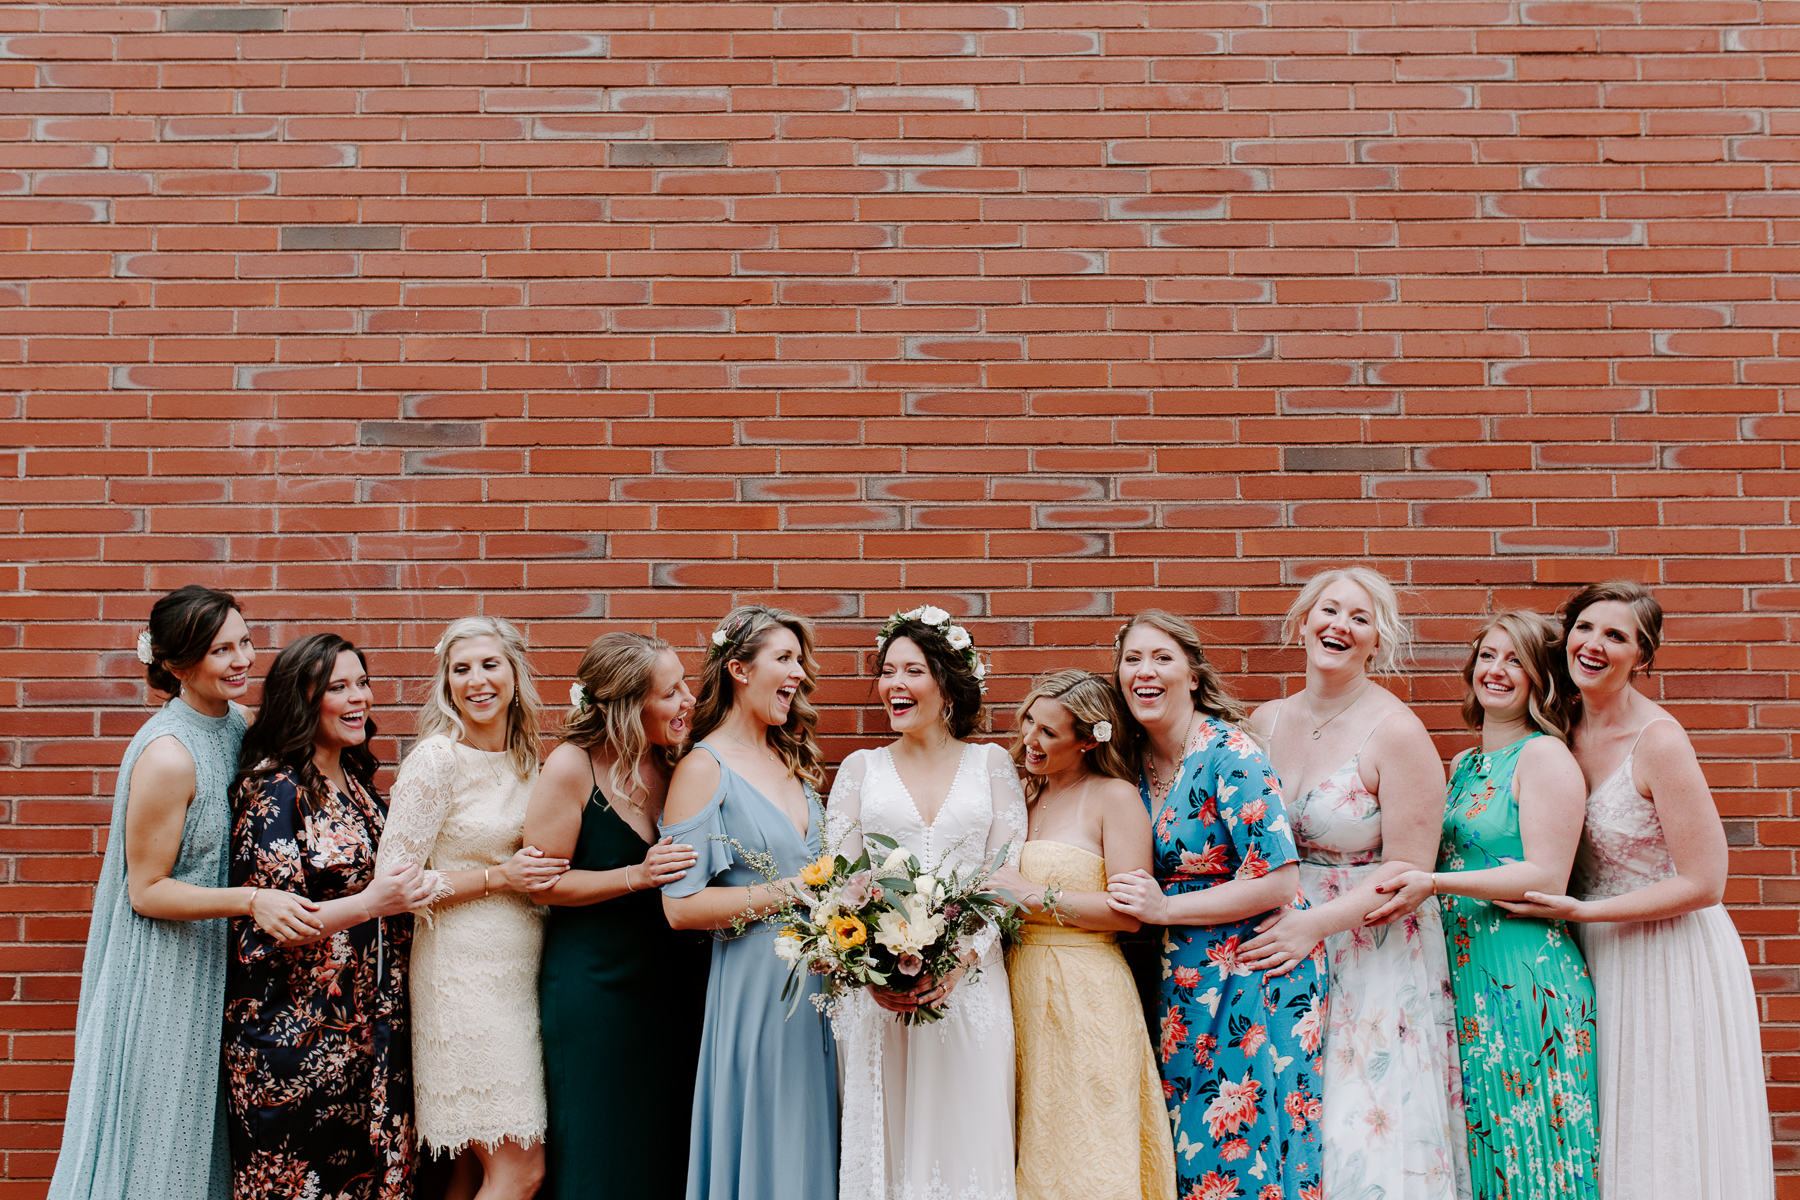 A bride and her bridesmaids in colorful dresses laugh in downtown Portland, Maine.  